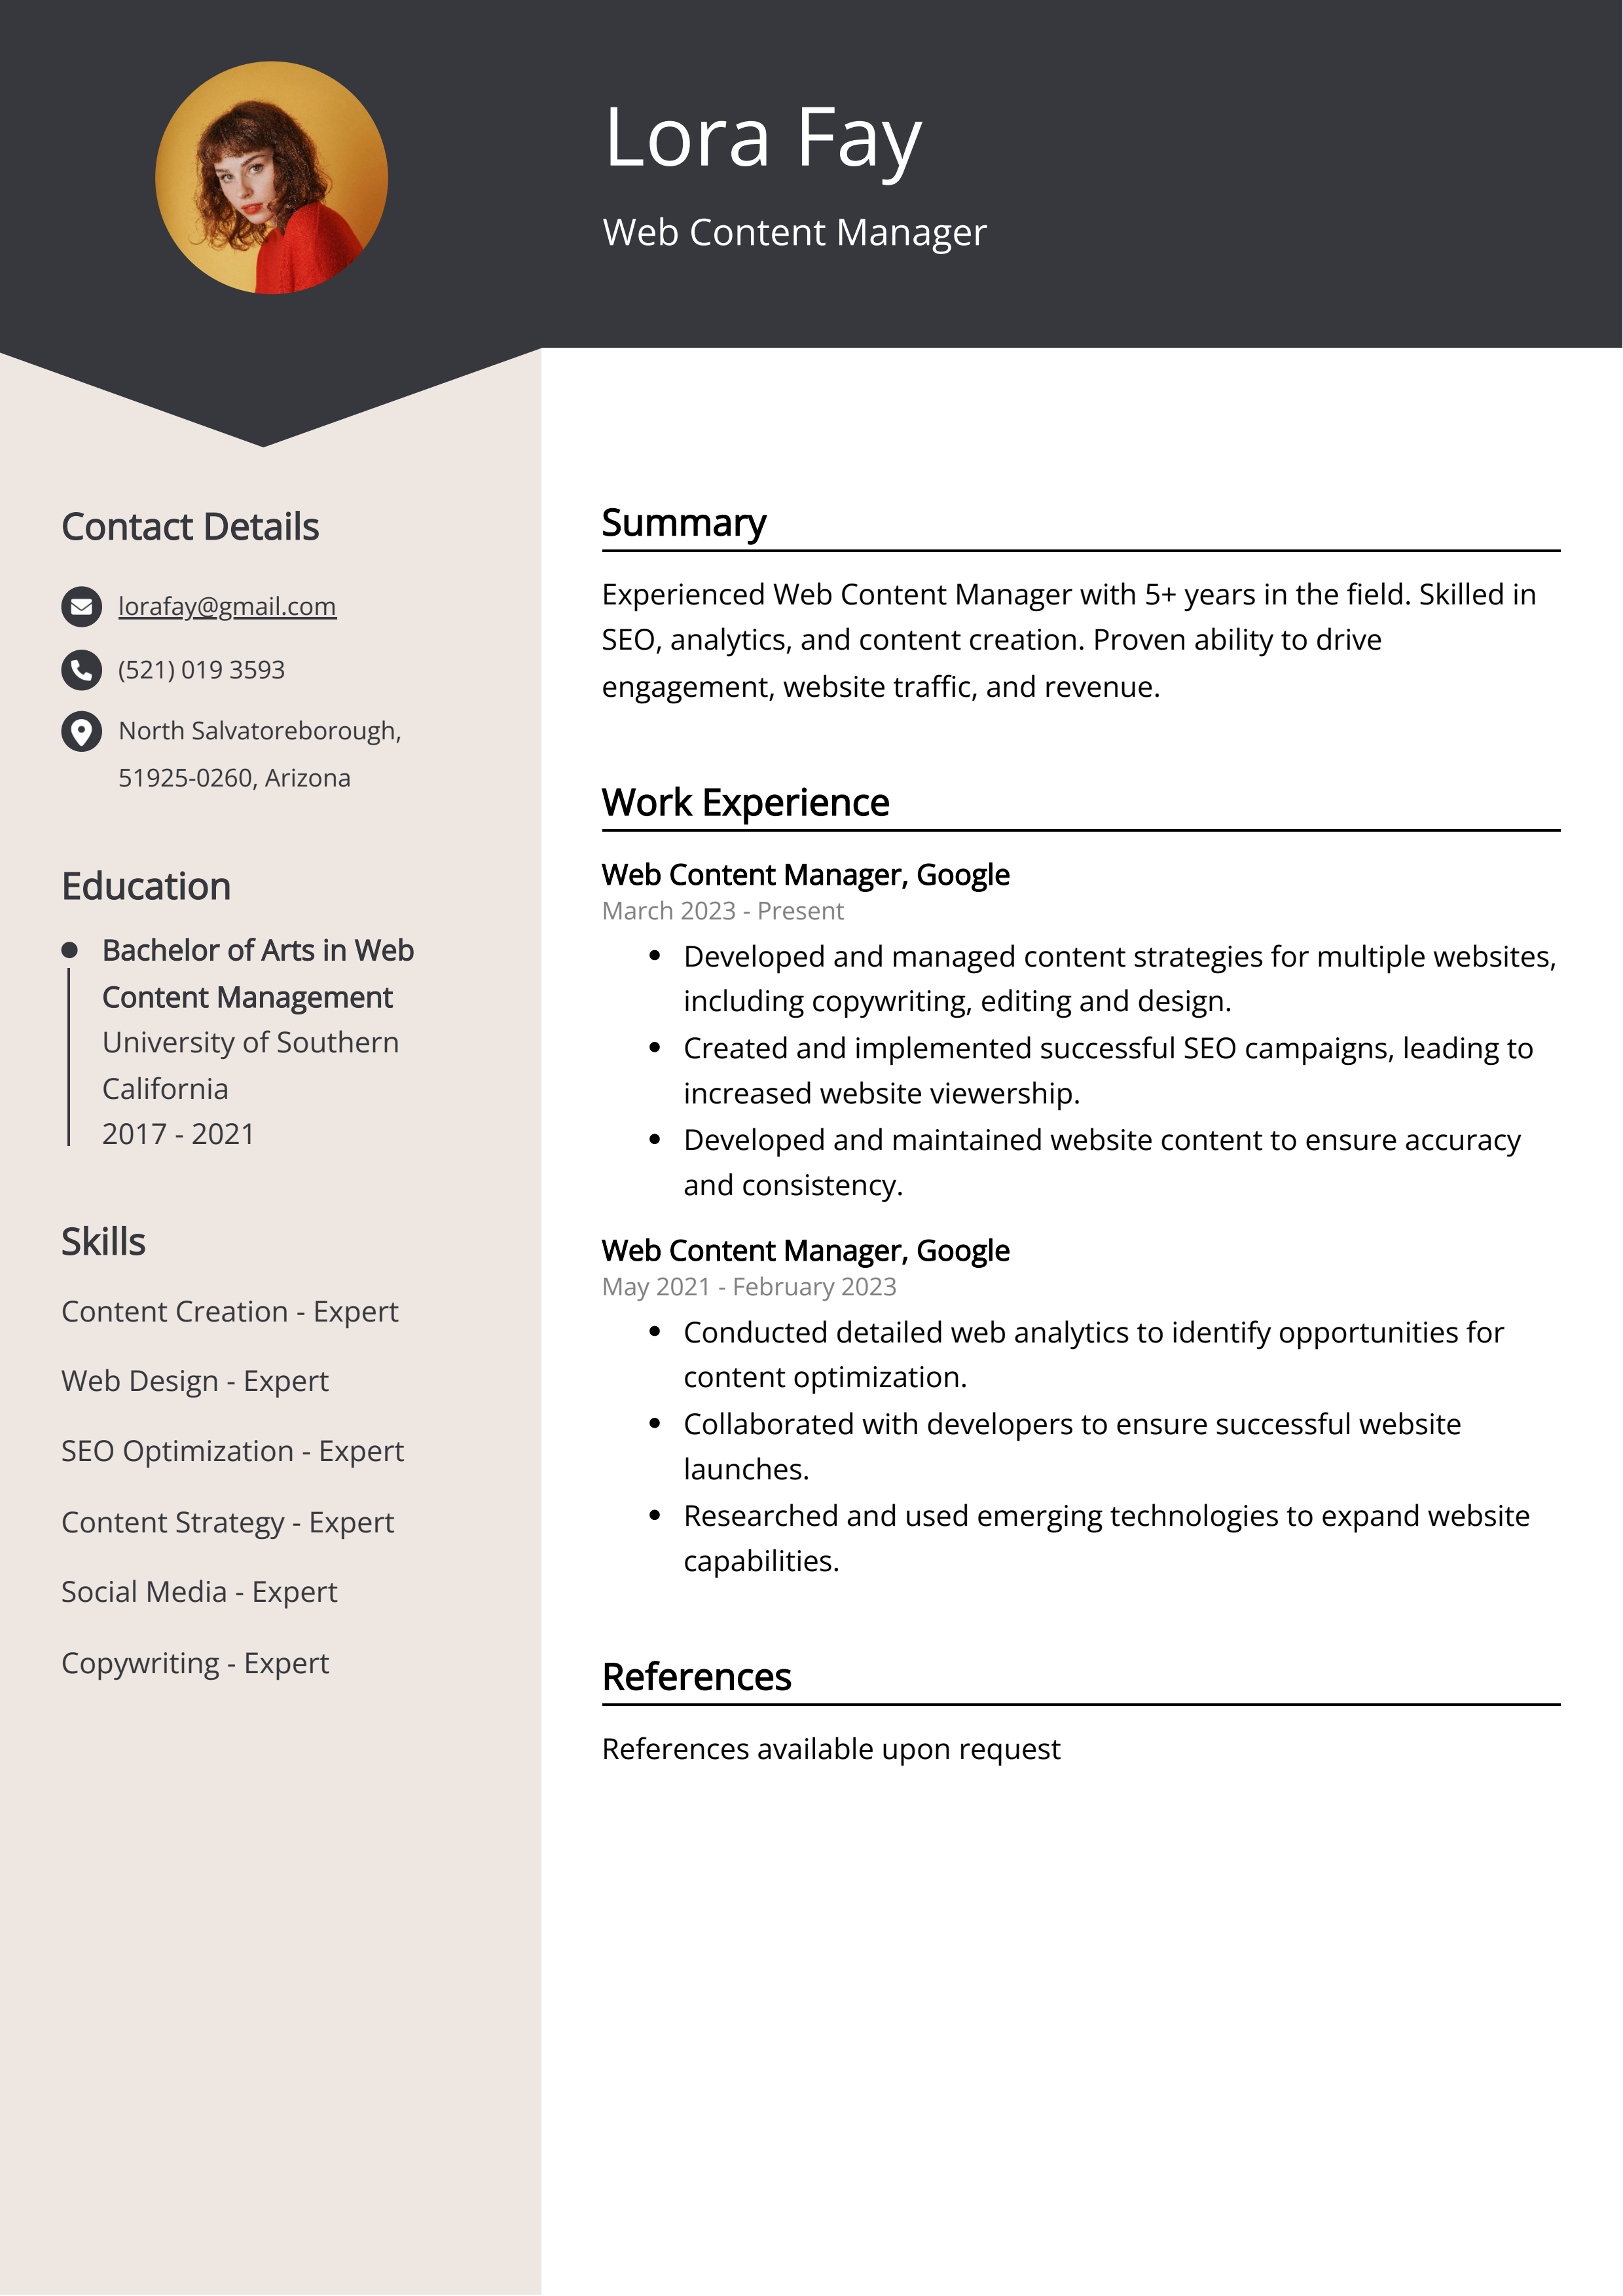 Web Content Manager CV Example